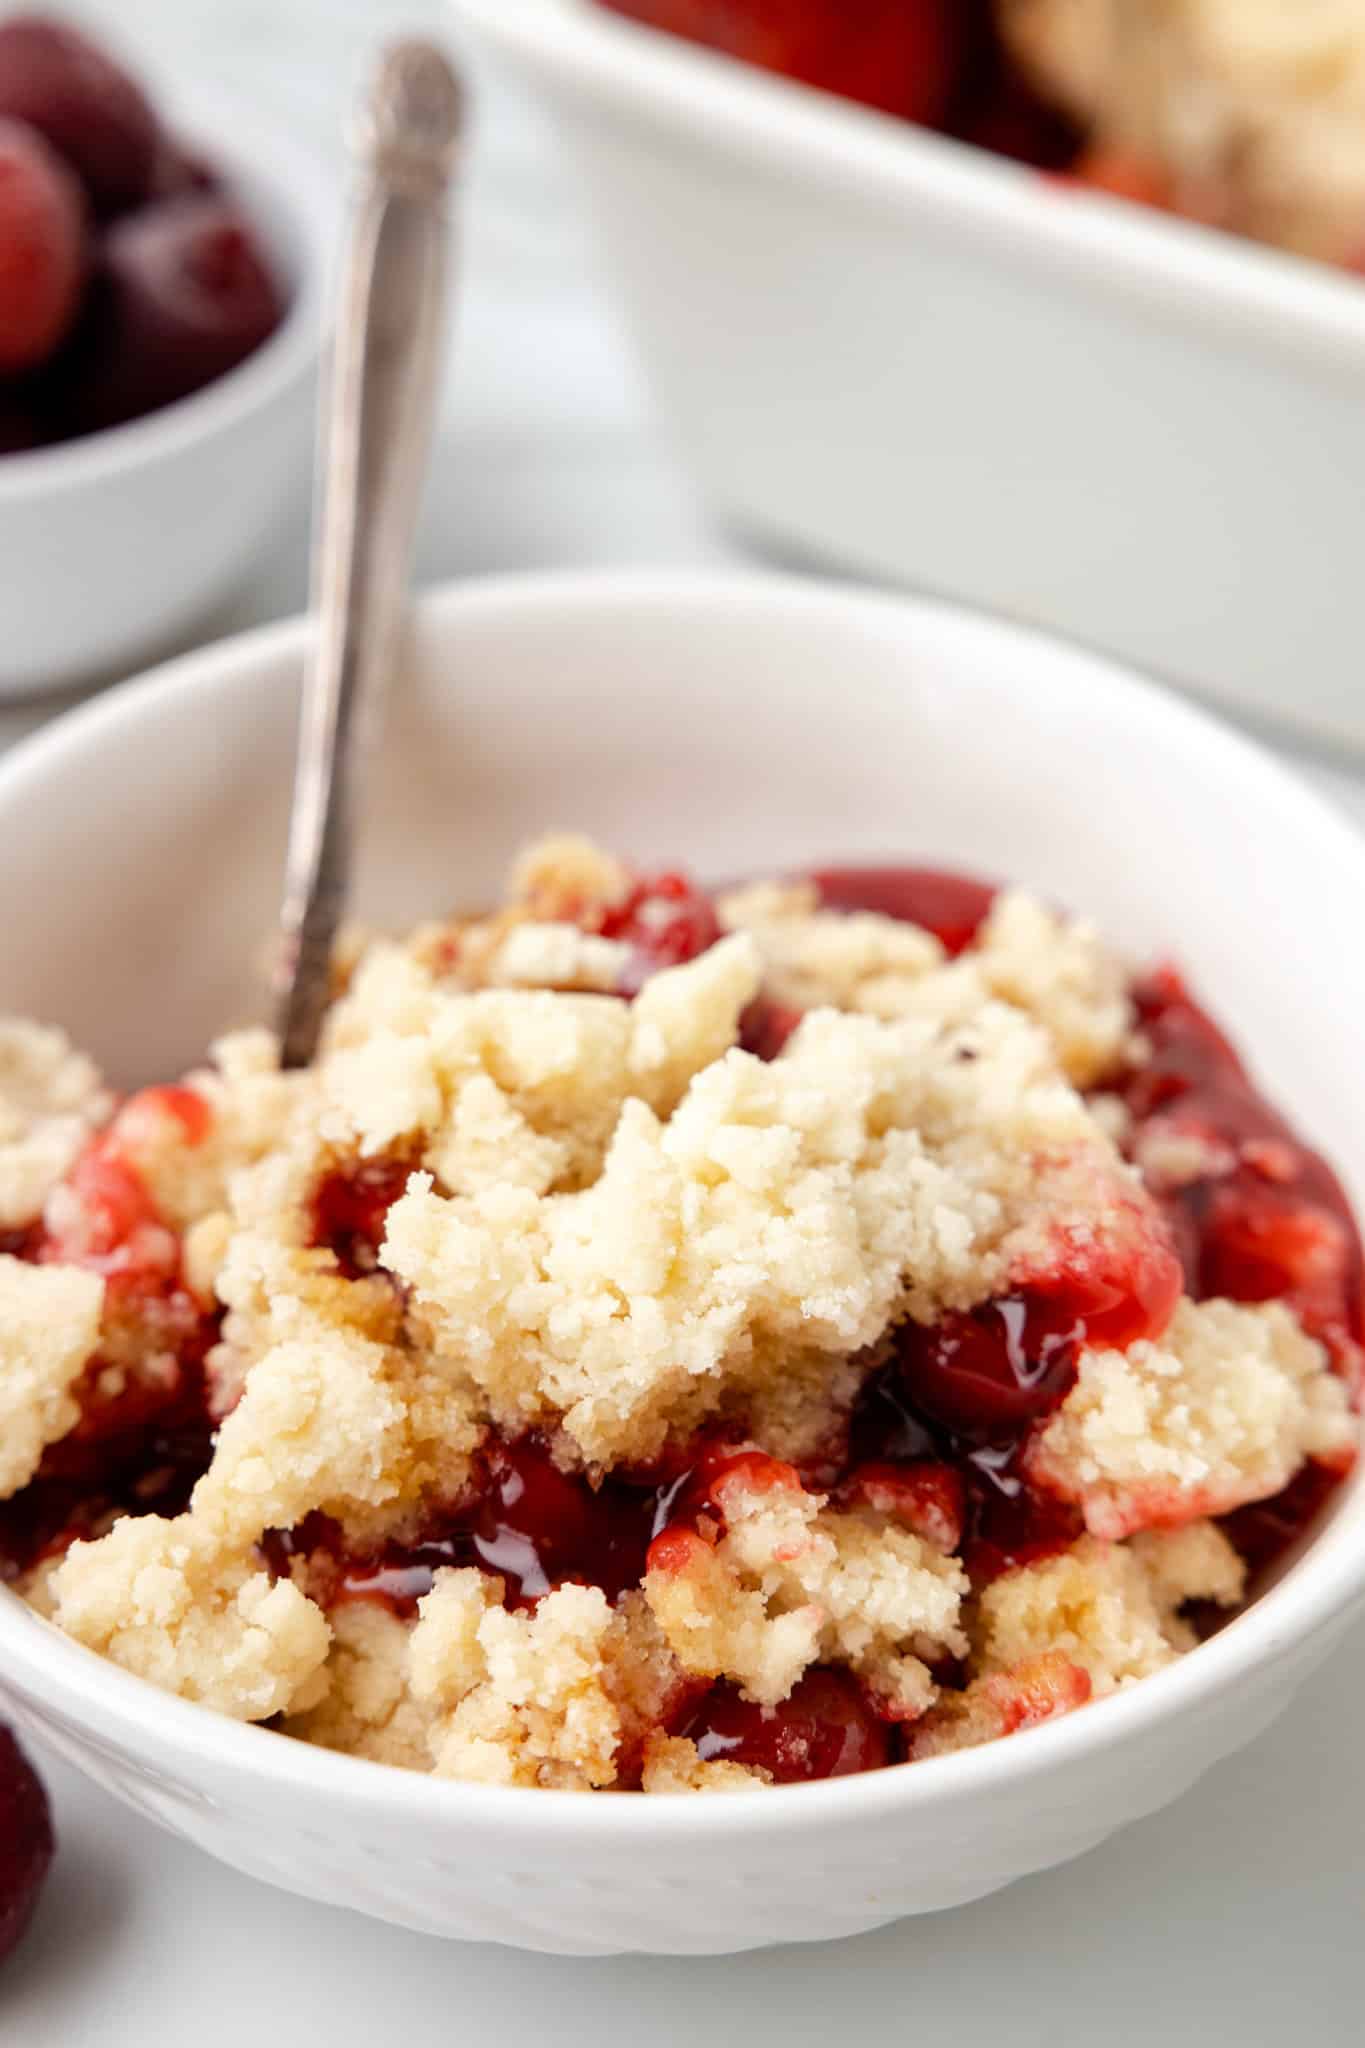 Cherry Cobbler is an easy three ingredient dessert recipe using canned cherry pie filling, sugar cookie mix and butter.